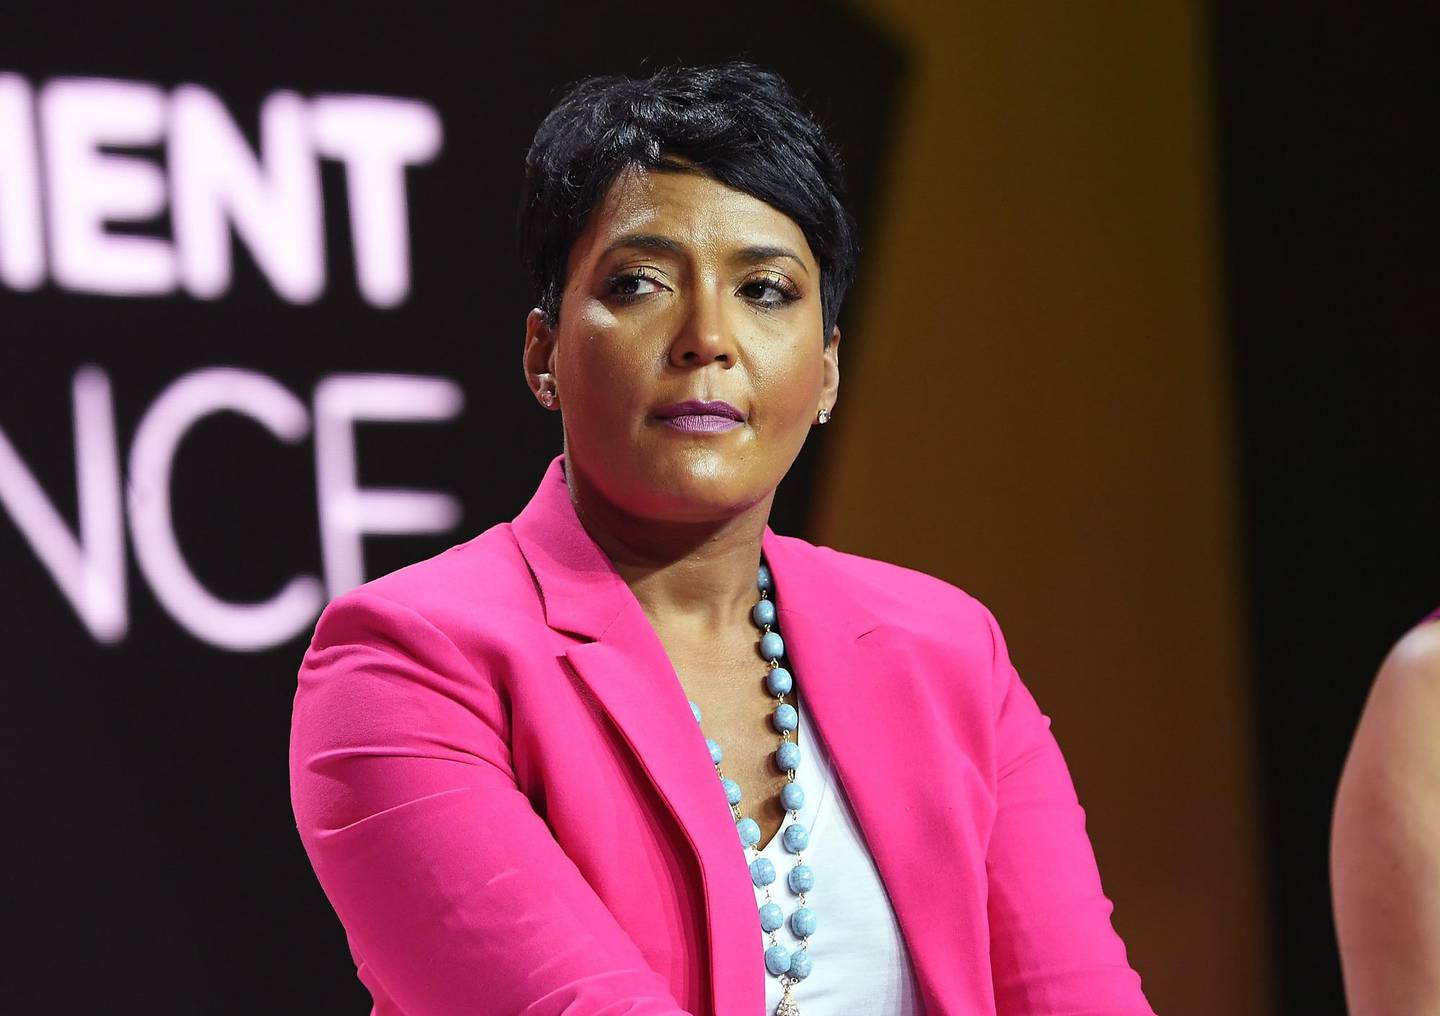 (FILES) In this file photo taken on July 06, 2018 Mayor of Atlanta Keisha Lance Bottoms speaks onstage during the 2018 Essence Festival presented by Coca-Cola at Ernest N. Morial Convention Center in New Orleans, Louisiana. - Atlanta Mayor Keisha Lance Bottoms has earned praise for her handling of turbulent anti-racism protests, boosting her prospects of becoming Joe Biden's running mate and potentially America's first black female vice president. (Photo by Paras Griffin / GETTY IMAGES NORTH AMERICA / AFP)